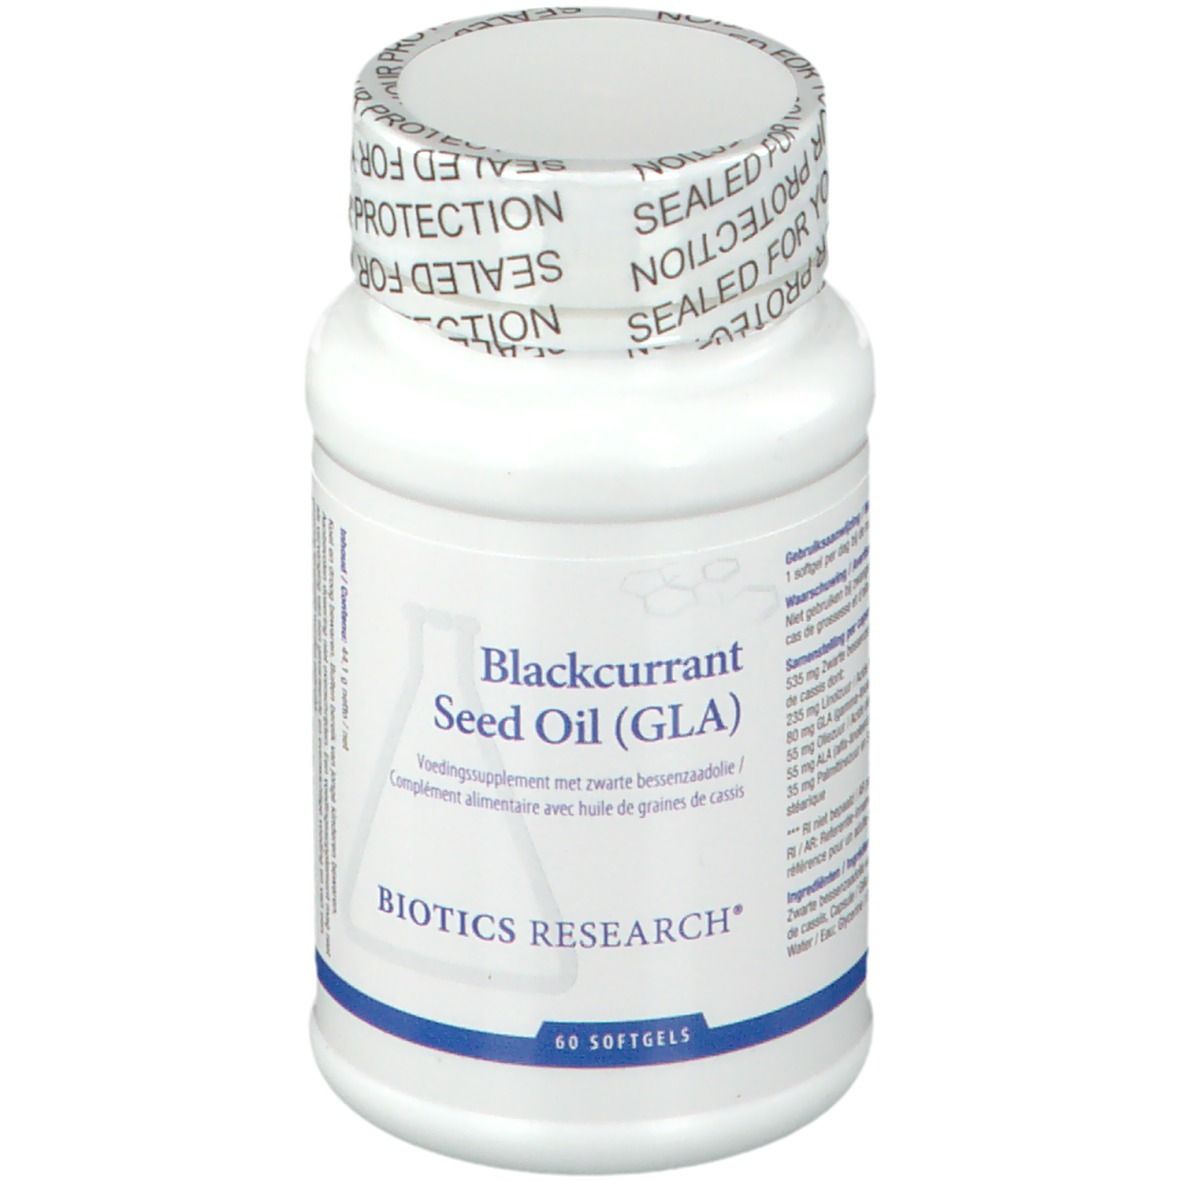 Biotics Research® Blackcurrant Seed Oil